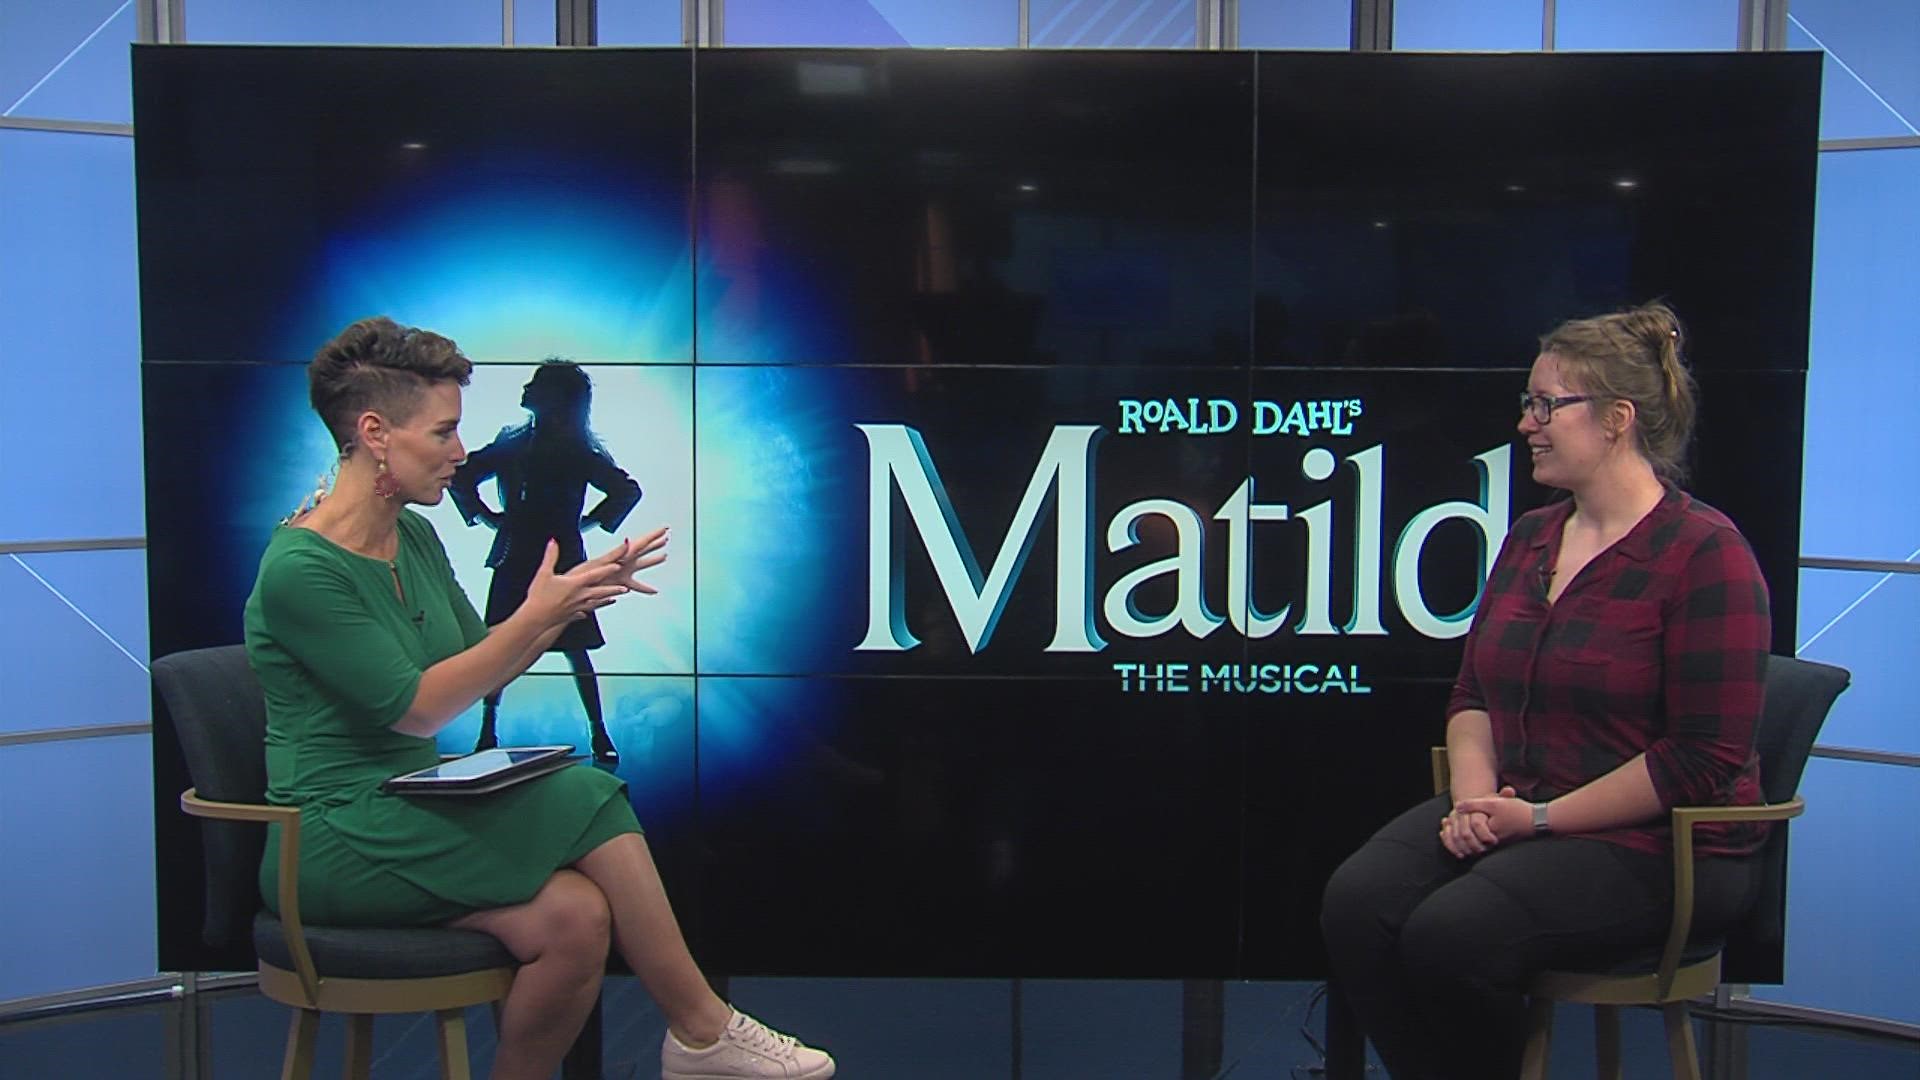 The musical will run from July 8 through July 24. For more information, visit dmplayhouse.com